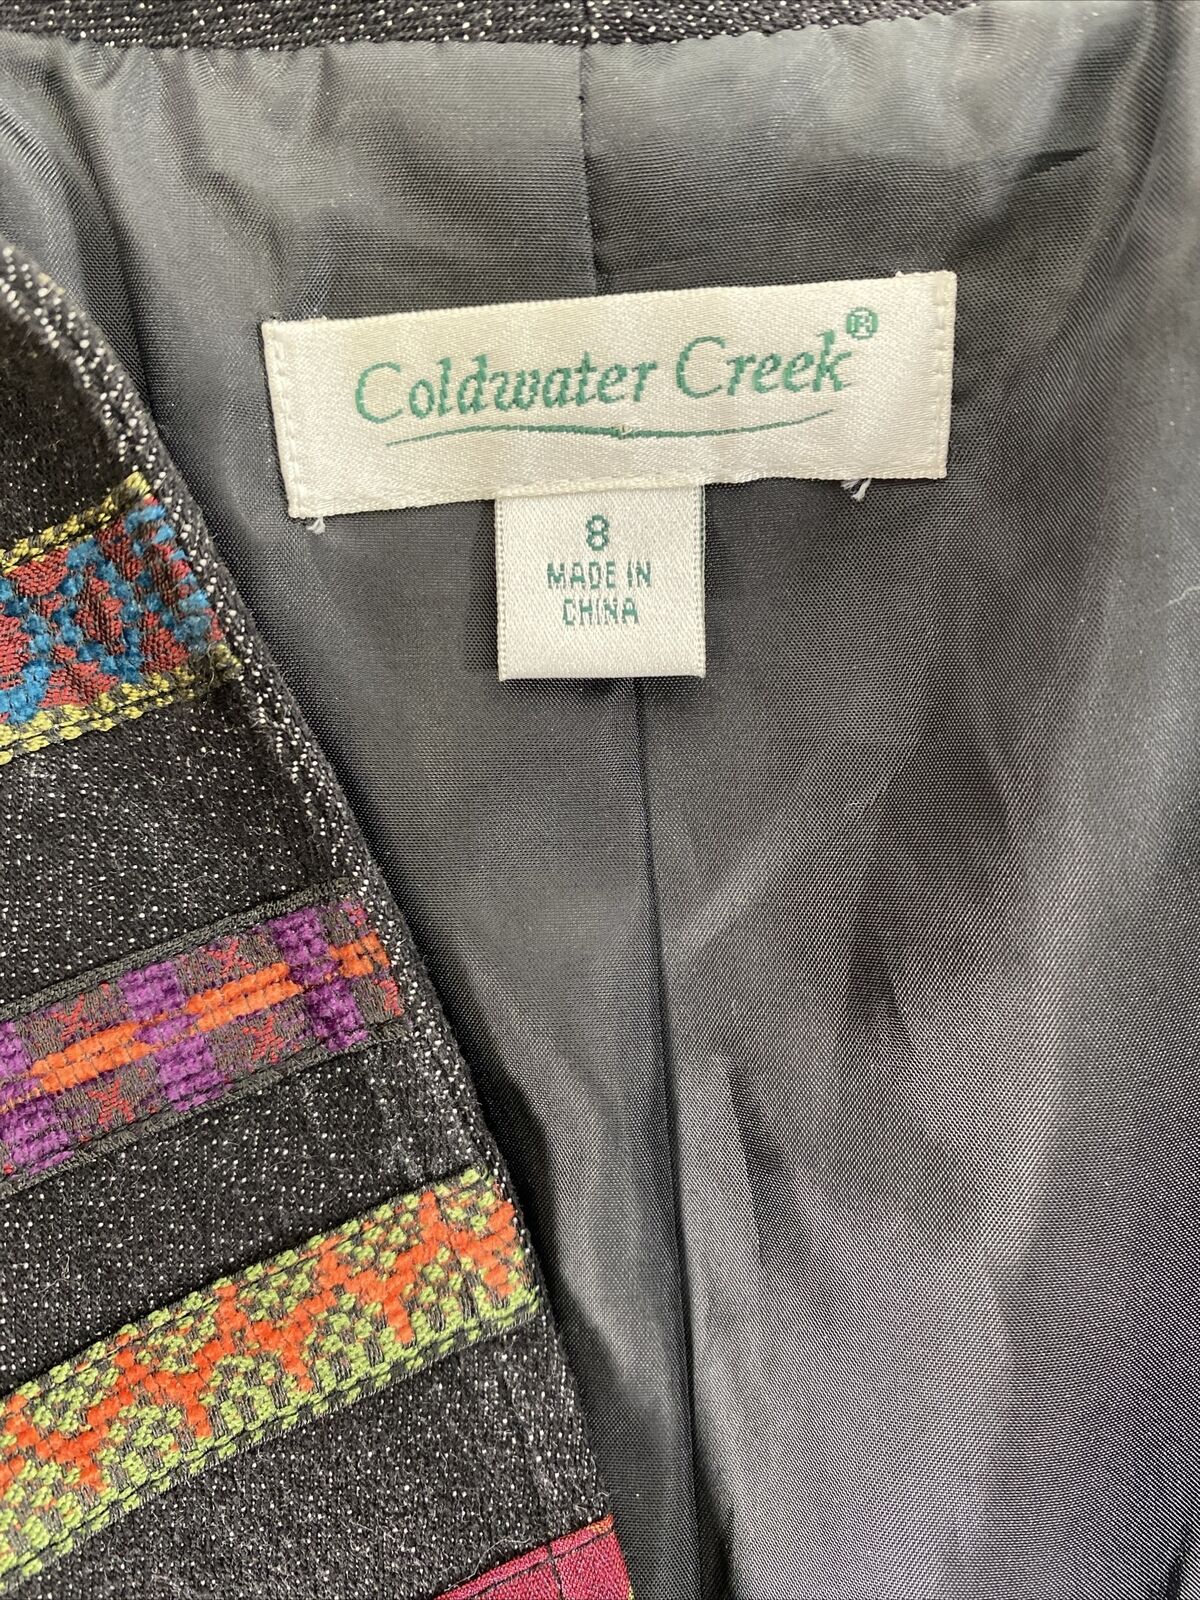 Coldwater Creek Women's Multi-Color Beaded Striped Jacket - 8